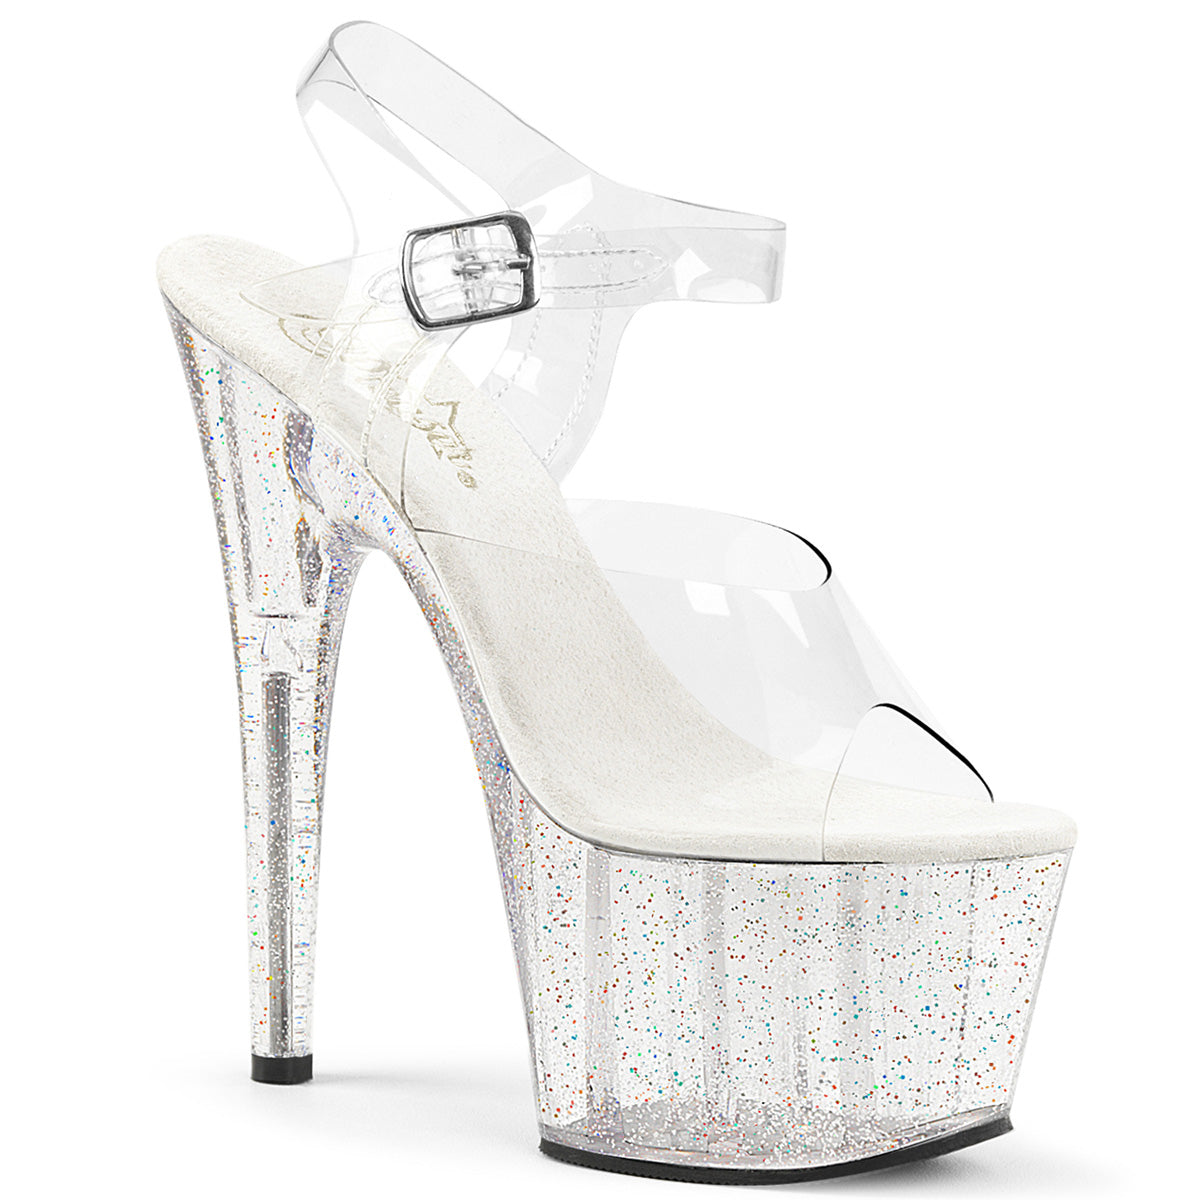 Adore-708 mg Pleasers 7 inch Heel Clear Pole Dancing Shoes